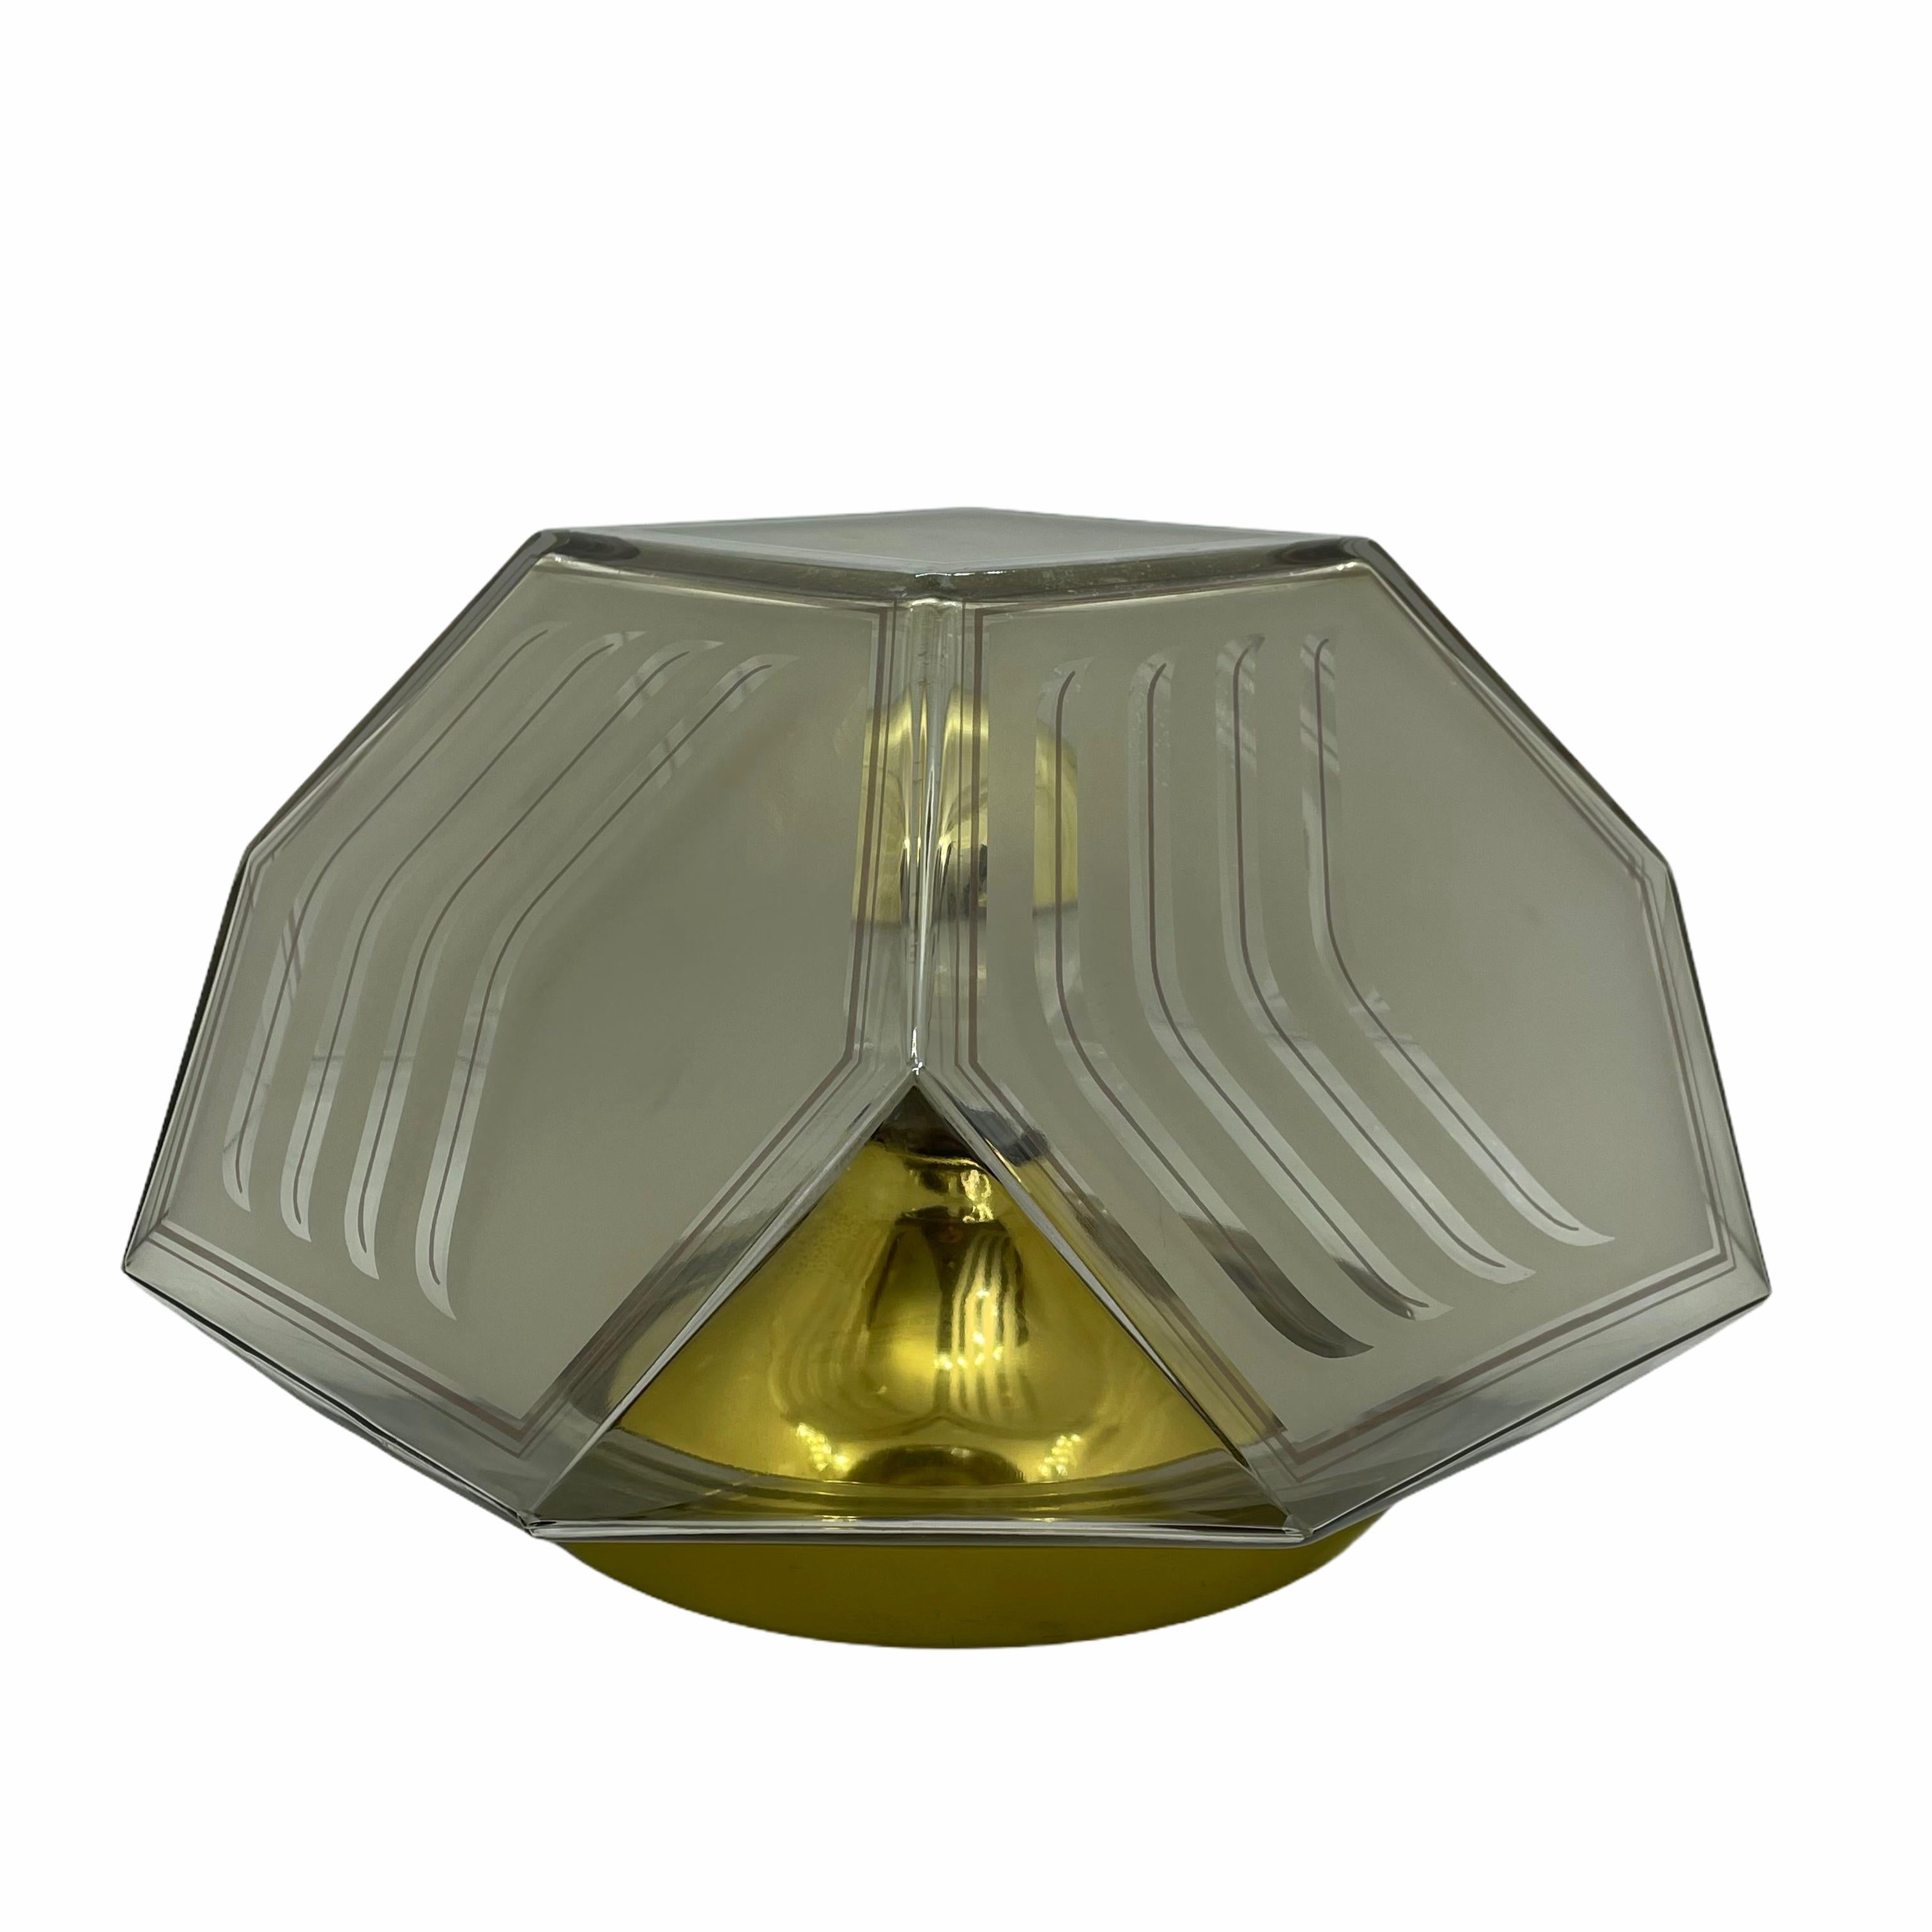 A beautiful large flush mount by German manufacturer Glashuette Limburg. The large glass element is supported by a polished brass plate with one light sources. Beautiful diamond shape smoked glass on a metal fixture. The Fixture requires one